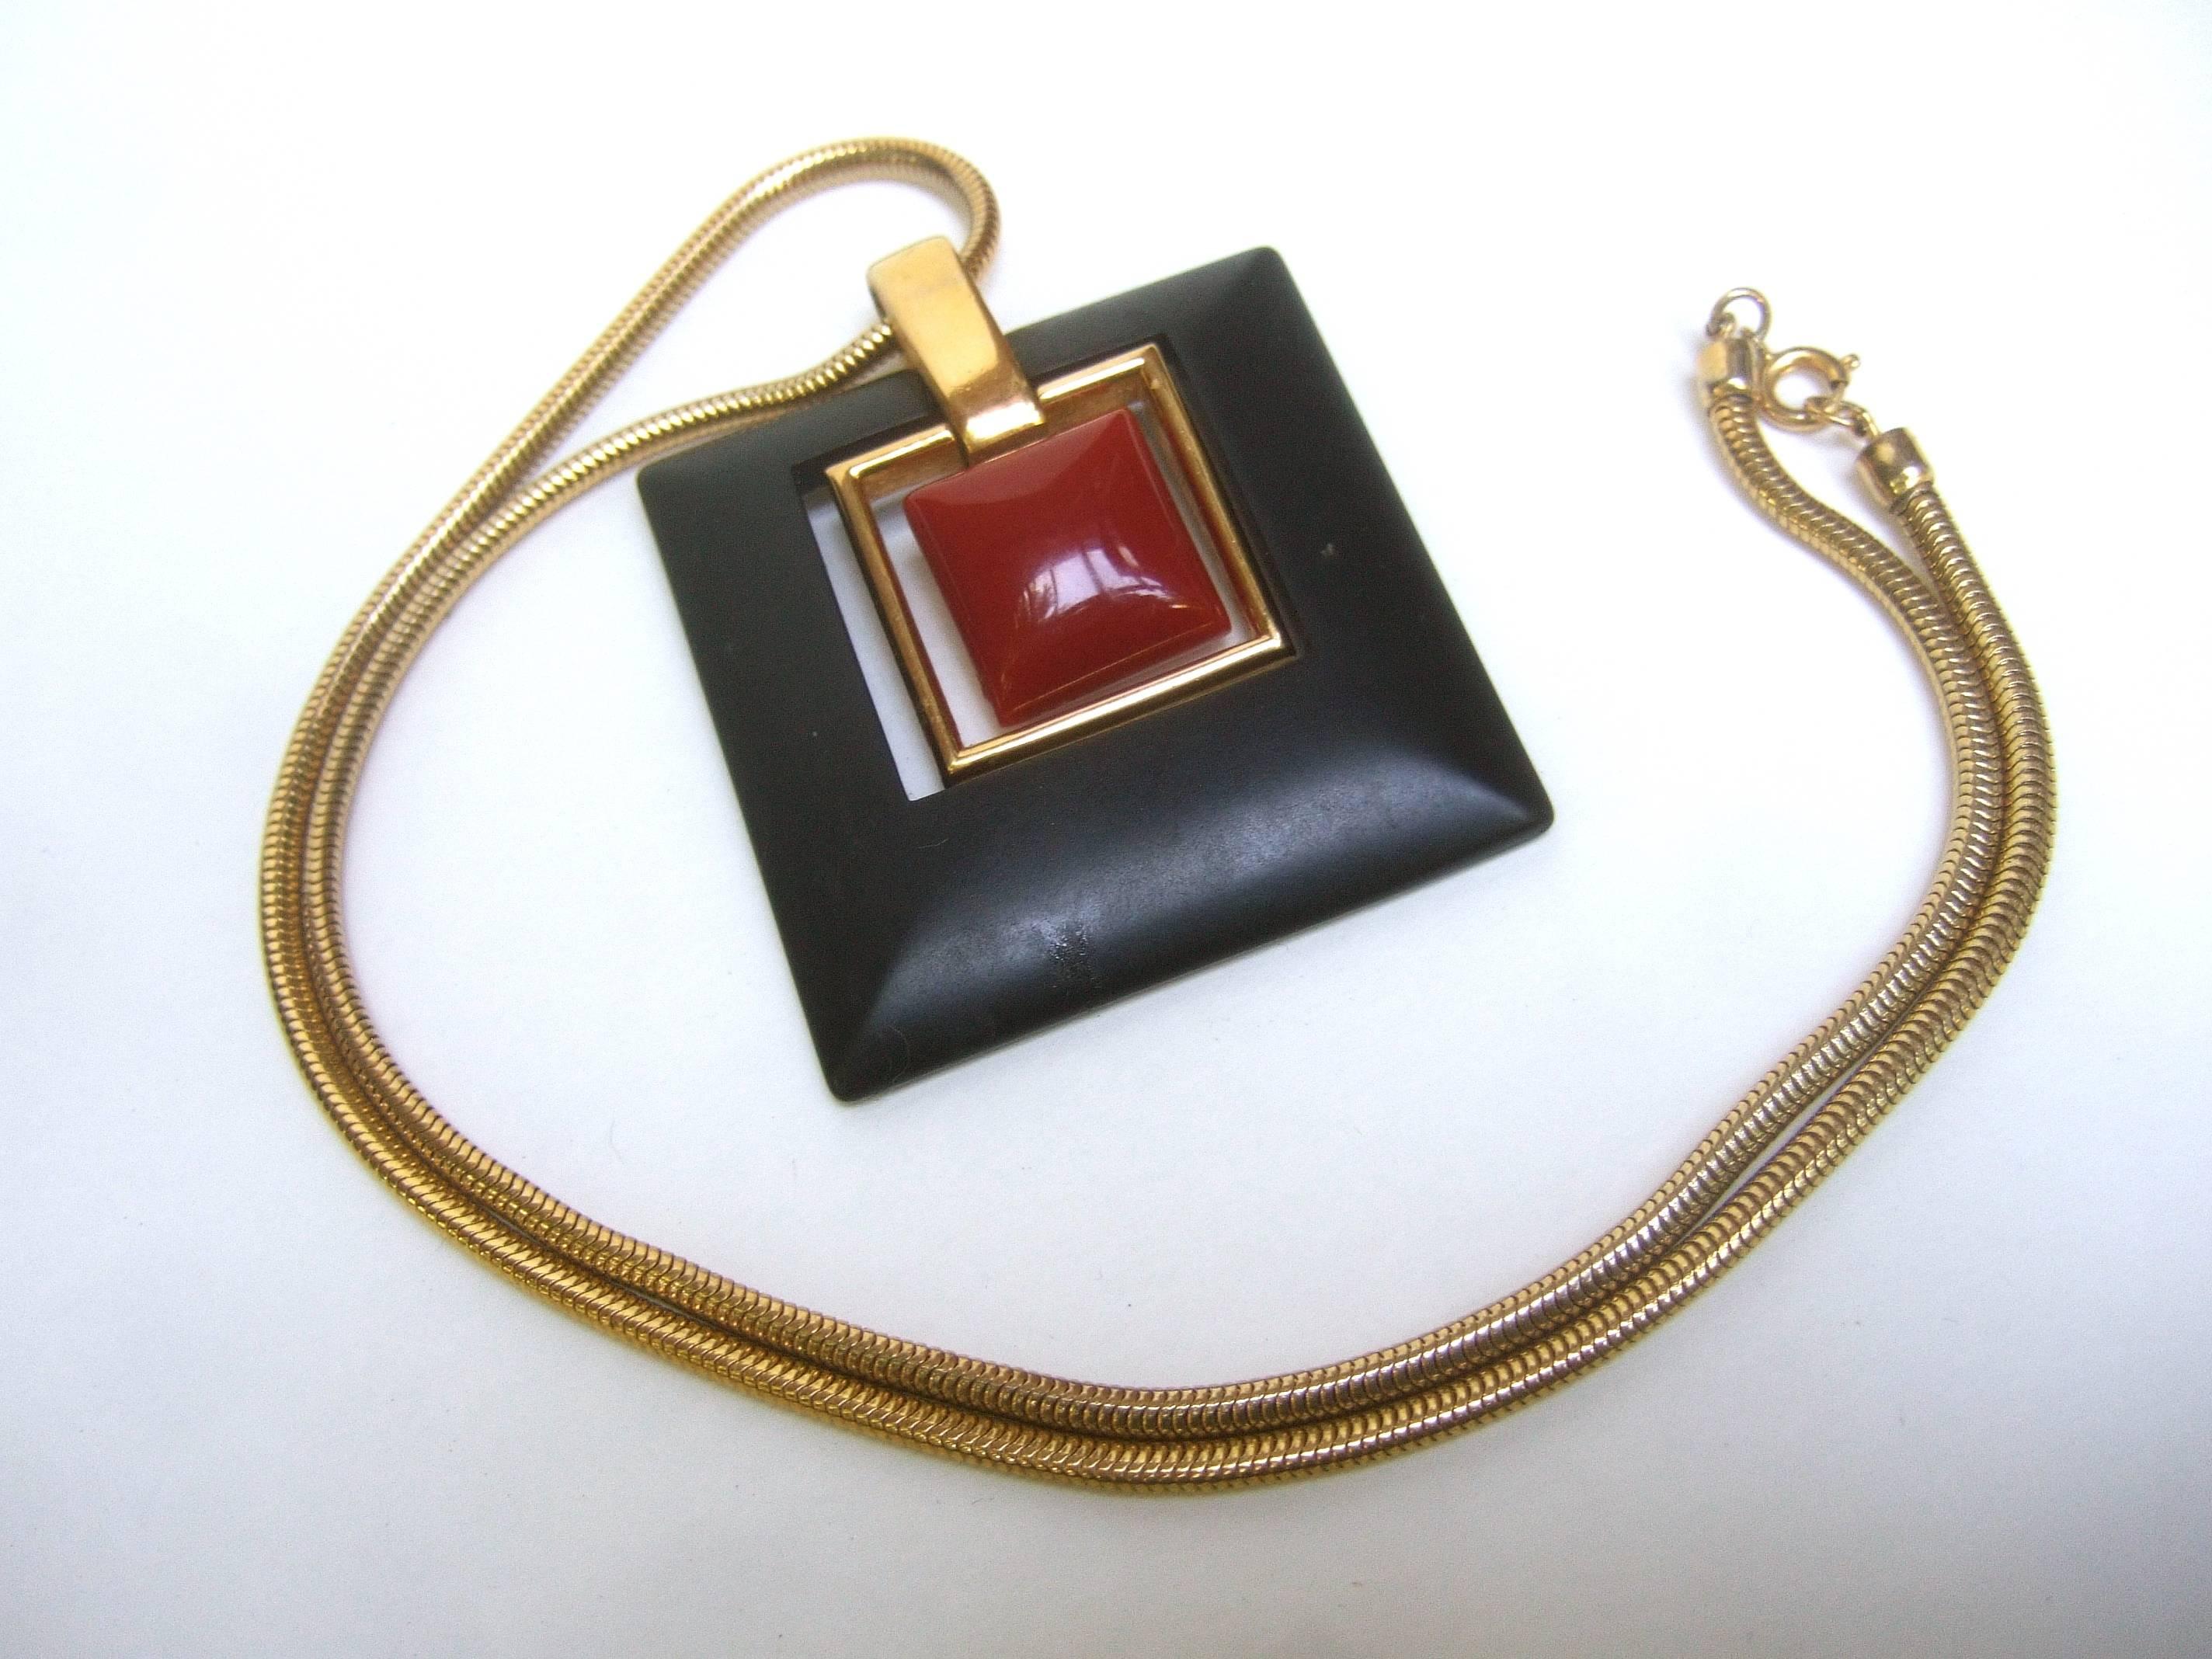 Trifari Mod cinnabar & ebony resin pendant necklace c 1970 
The severe bold design has a center cinnabar color
lucite tile framed with gilt metal and a large black
resin border

The large geometric pendant is suspended from a slinky 
gilt